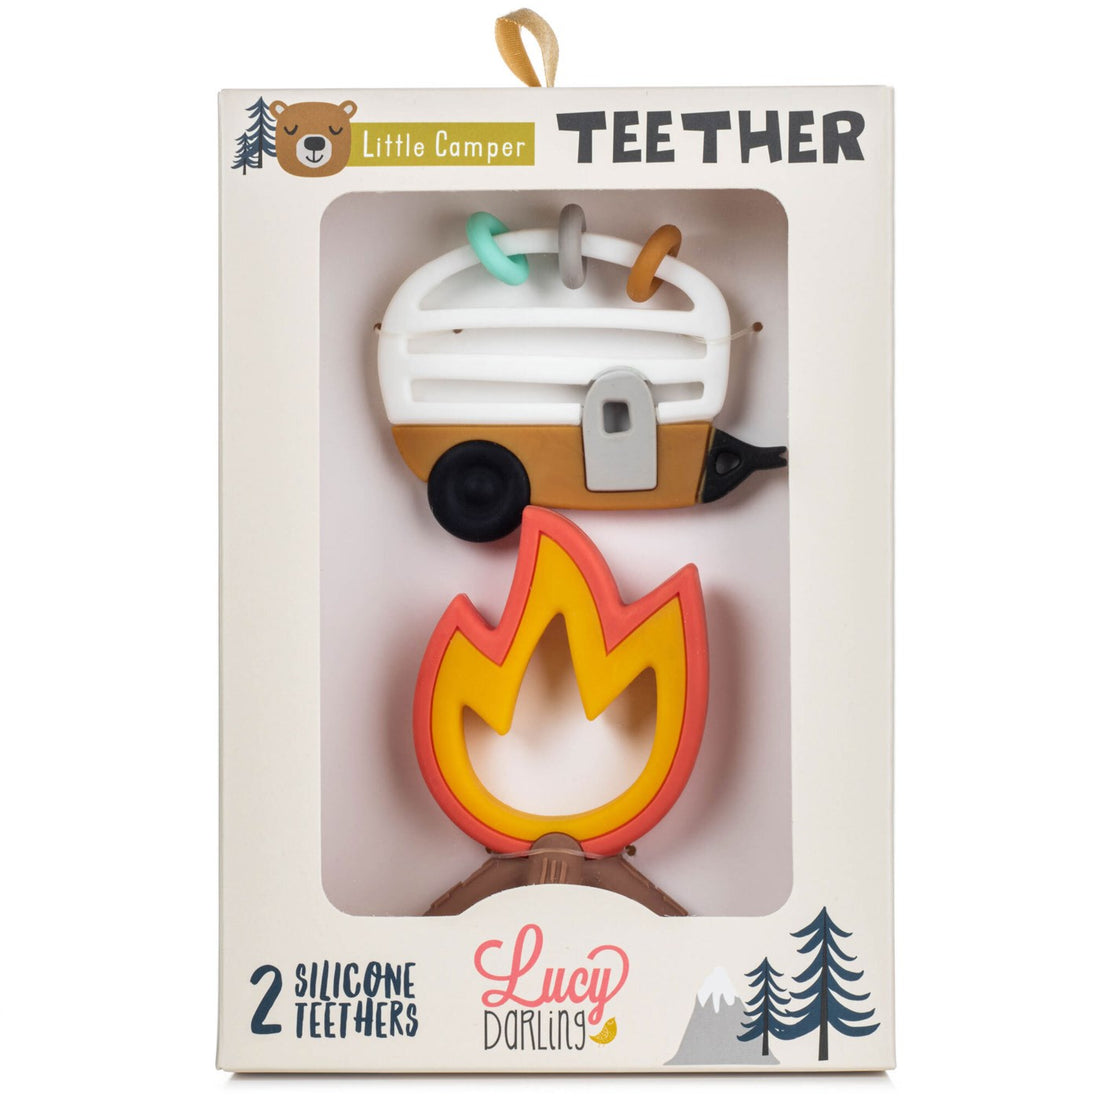 Lucy Darling Little Camper Teether Toy Set